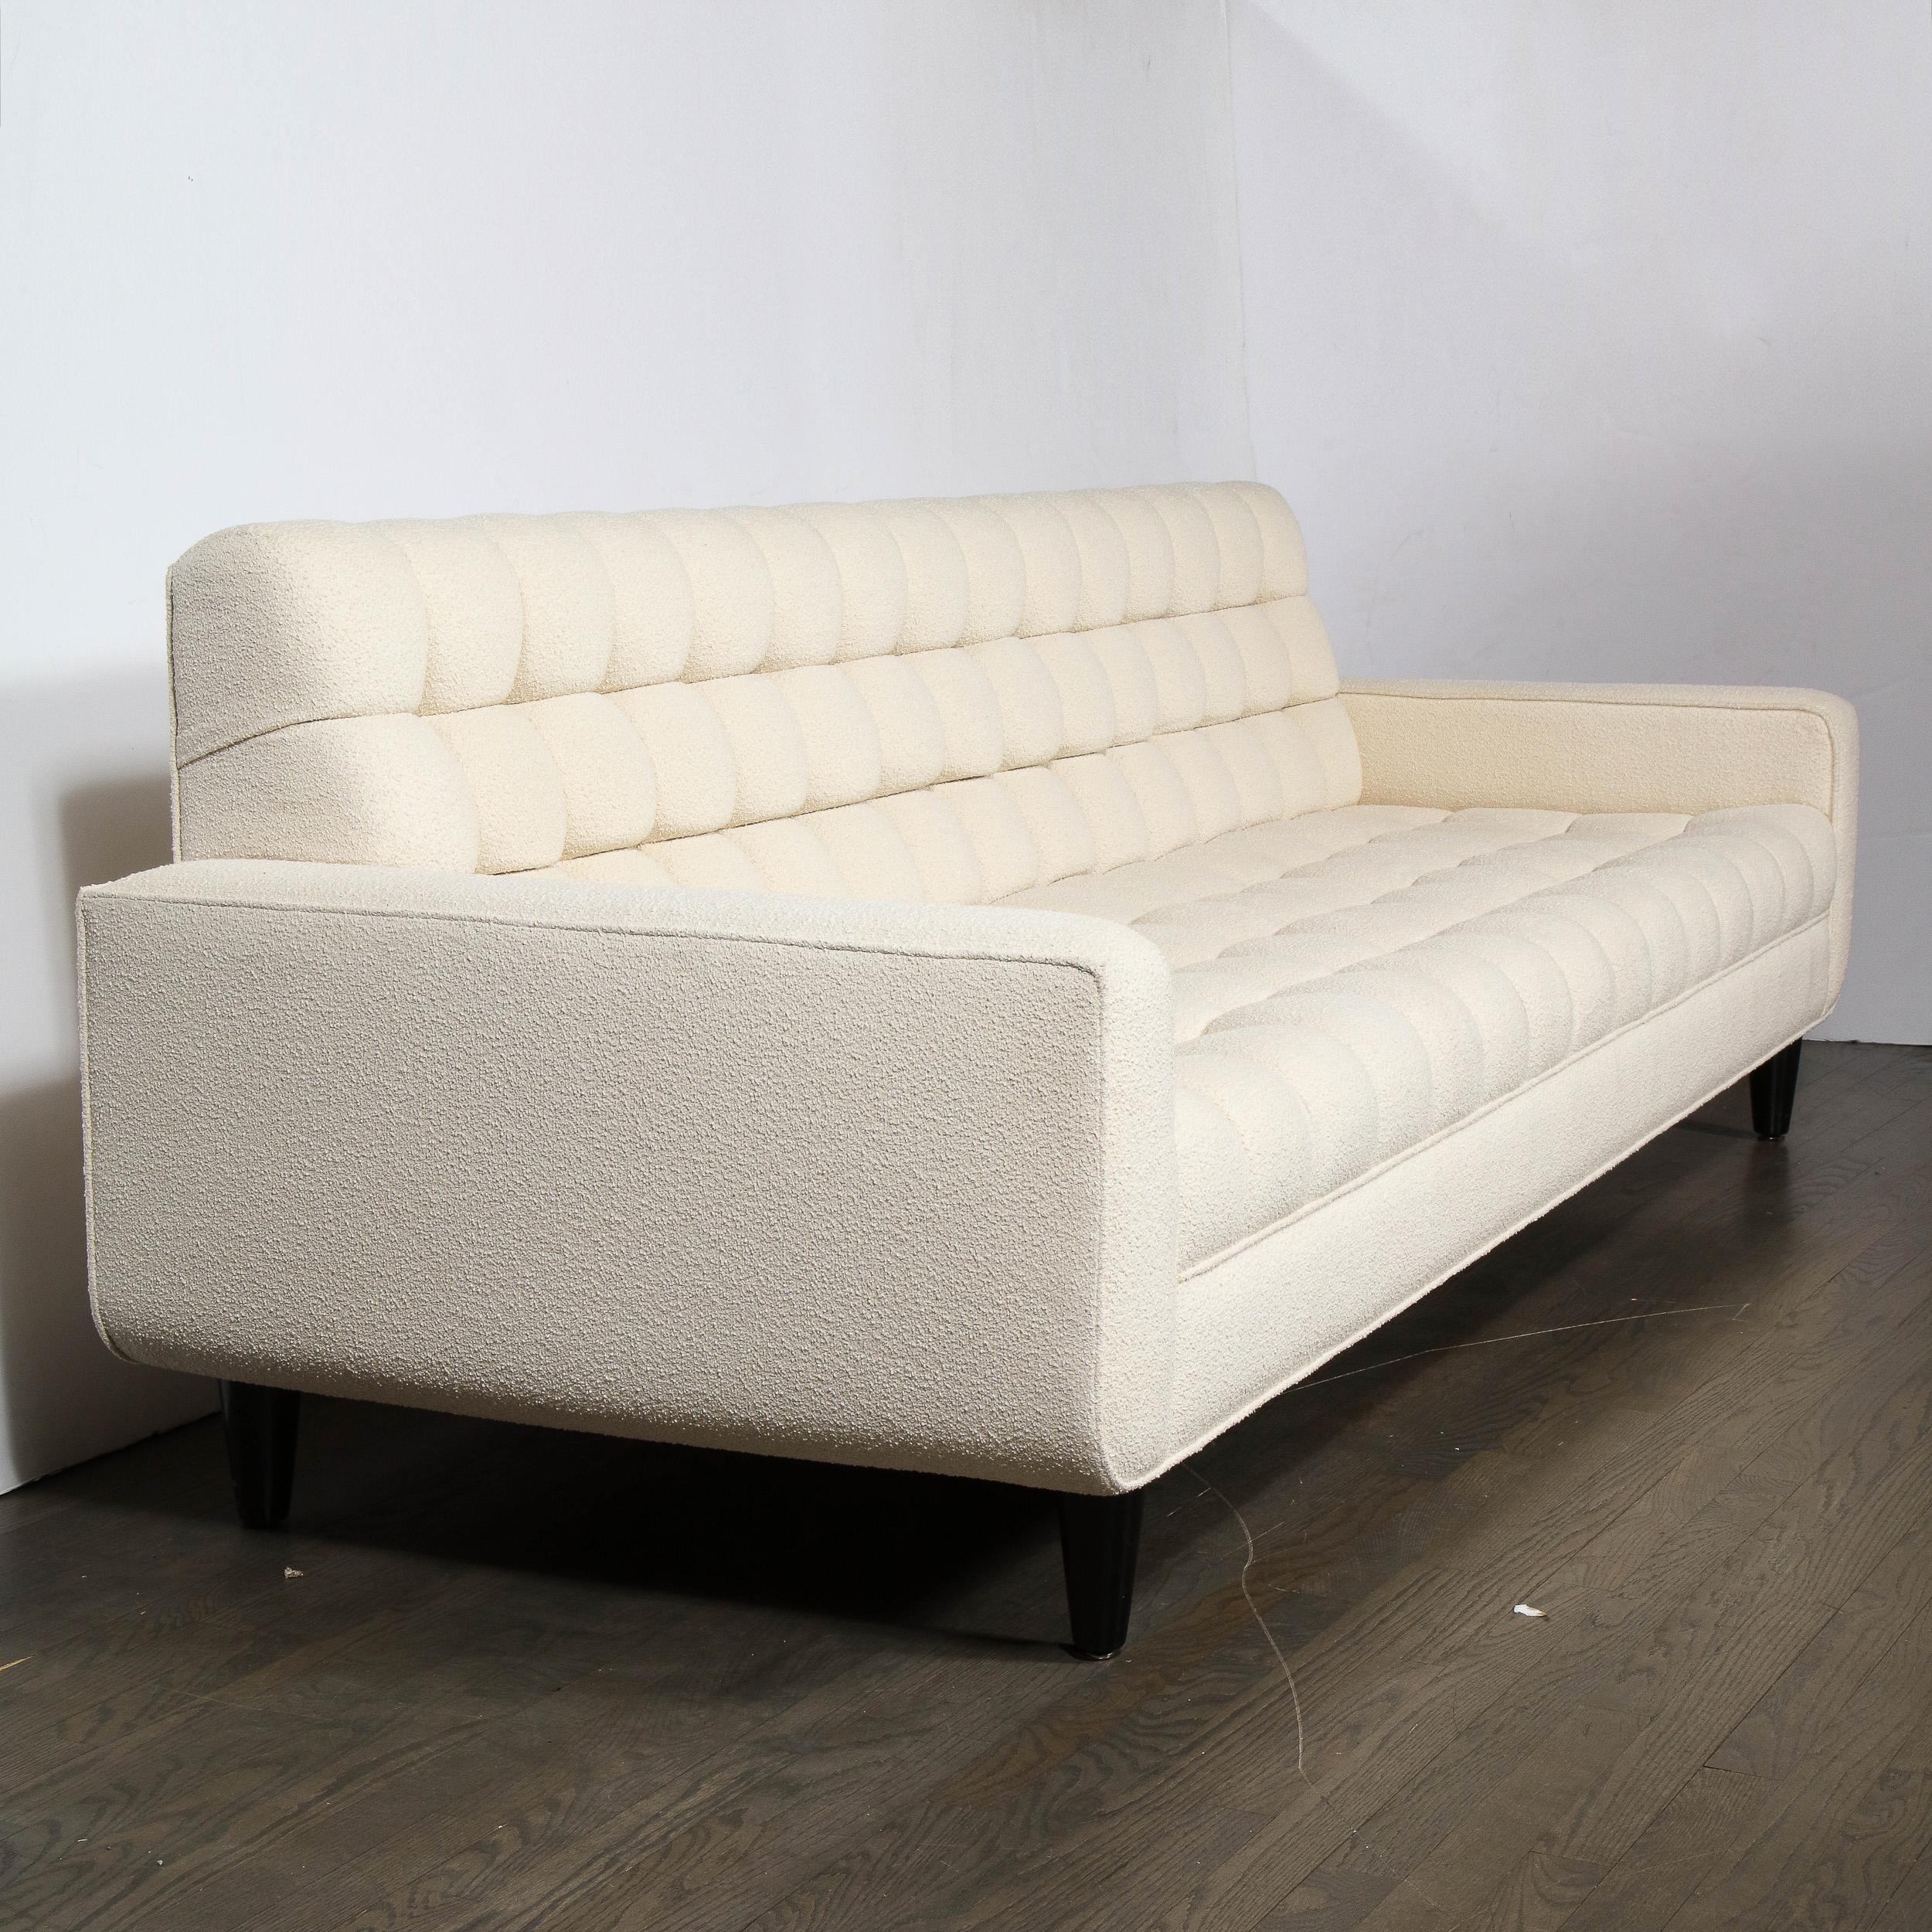 American Mid-Century Modern Biscuit Tufted Sofa by Billy Haines in Cream Bouclé Fabric